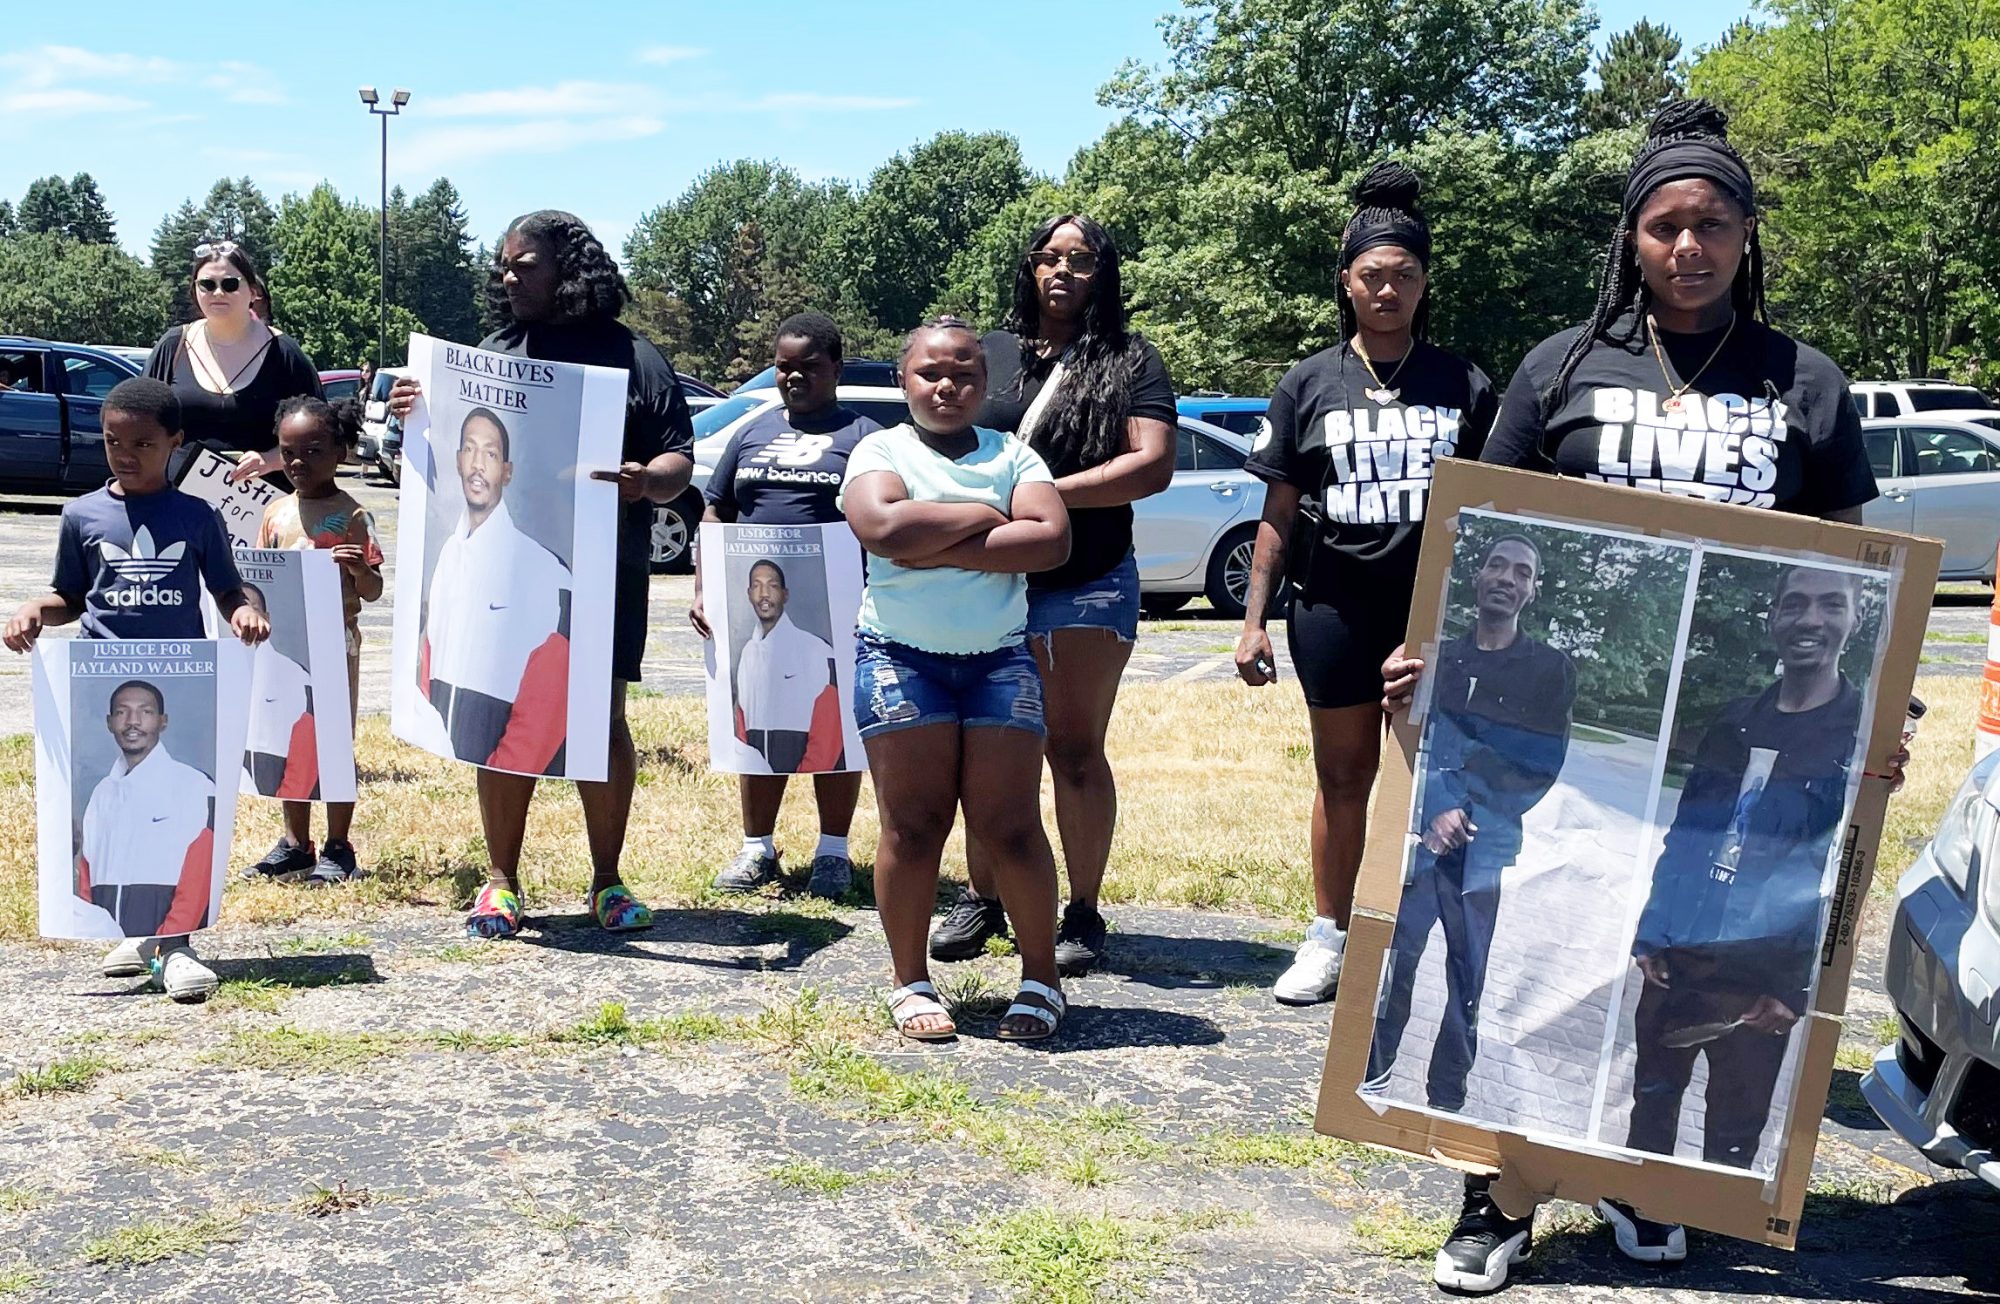 Protestors express outrage about the killing of Jayland Walker- An unarmed moterst shot on Monday, June 26, 2022. (Reporter photo)